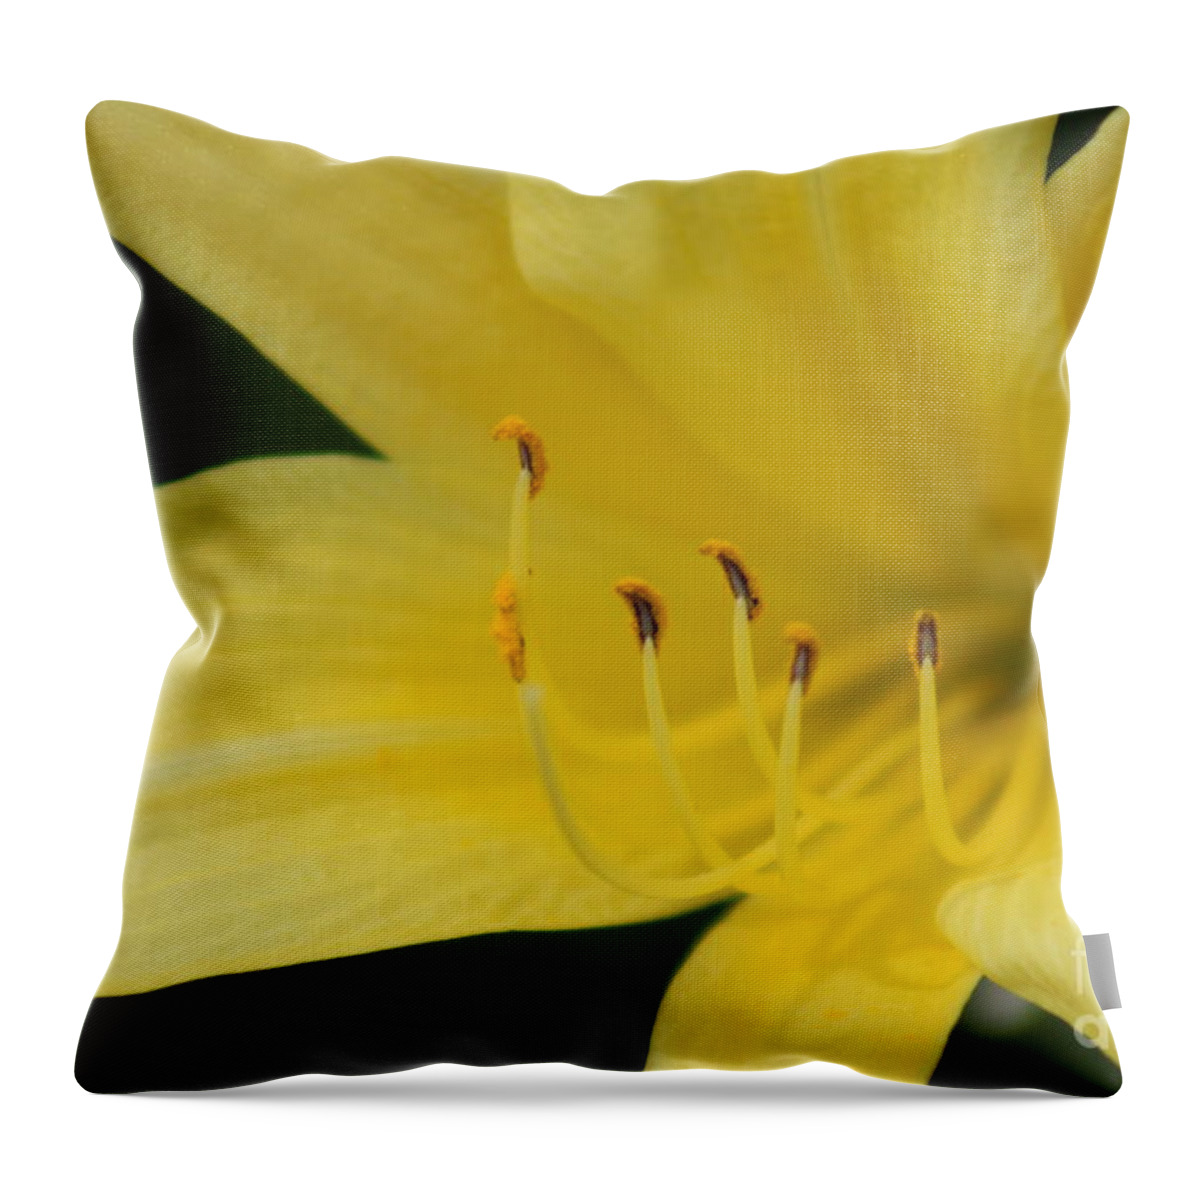 Yellow Throw Pillow featuring the photograph Nature's Beauty 39 by Deena Withycombe